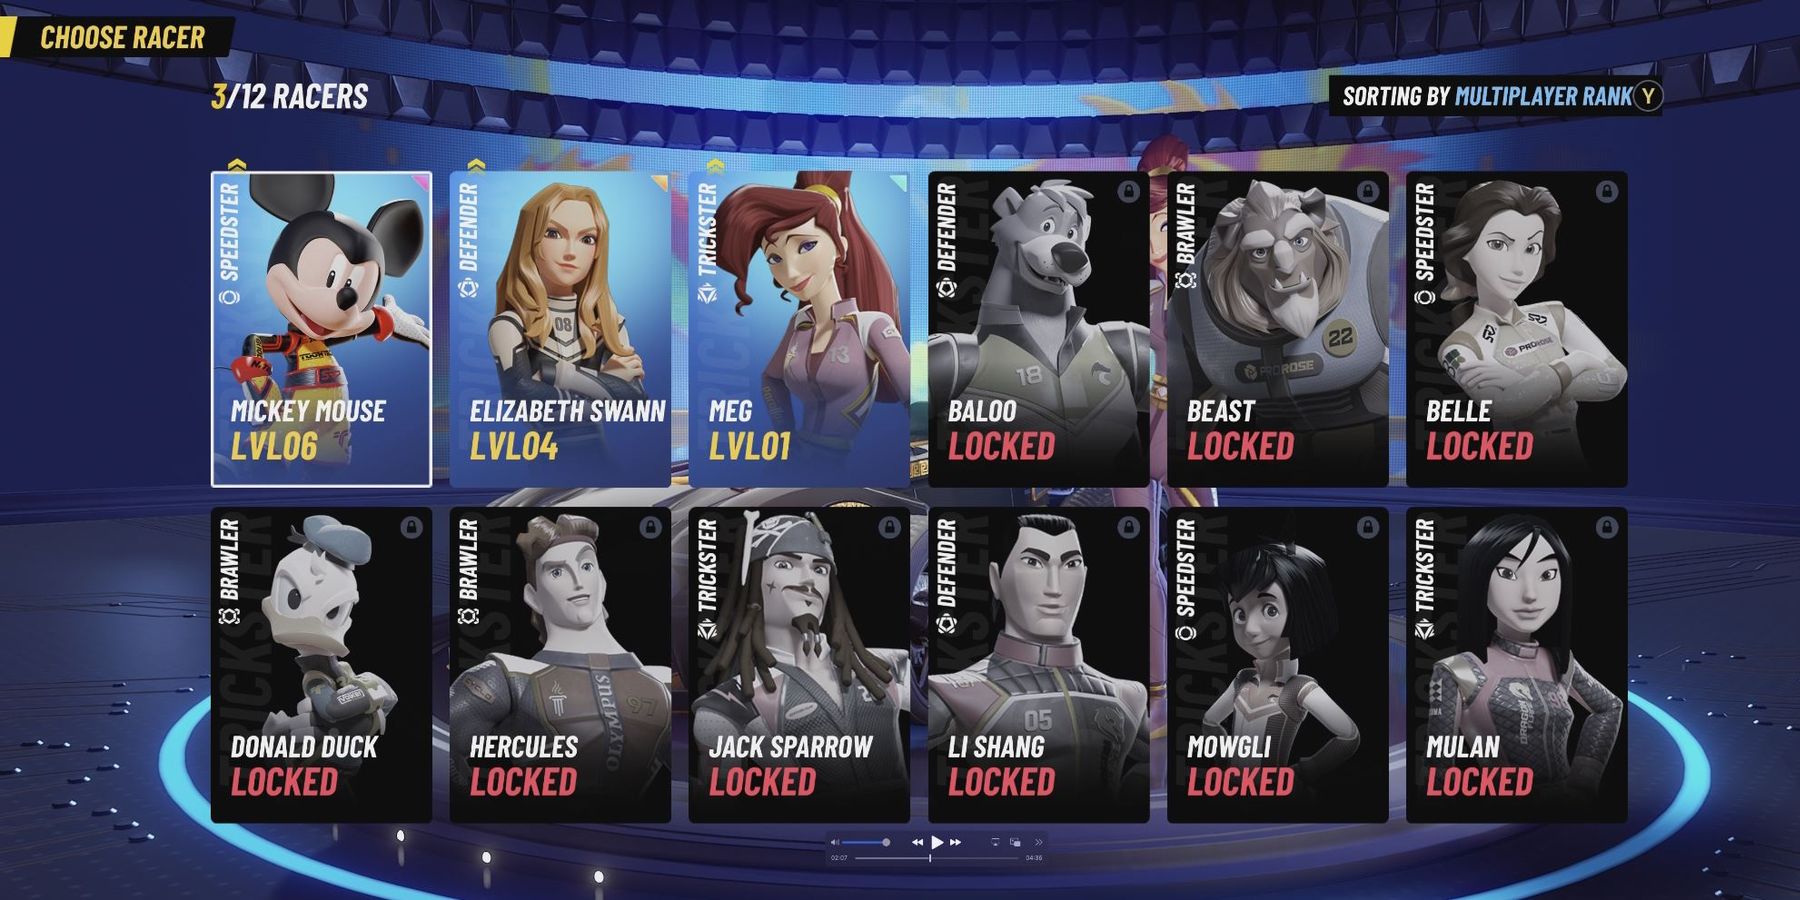 The Disney Speedstorm Racers roster with many racers is still locked